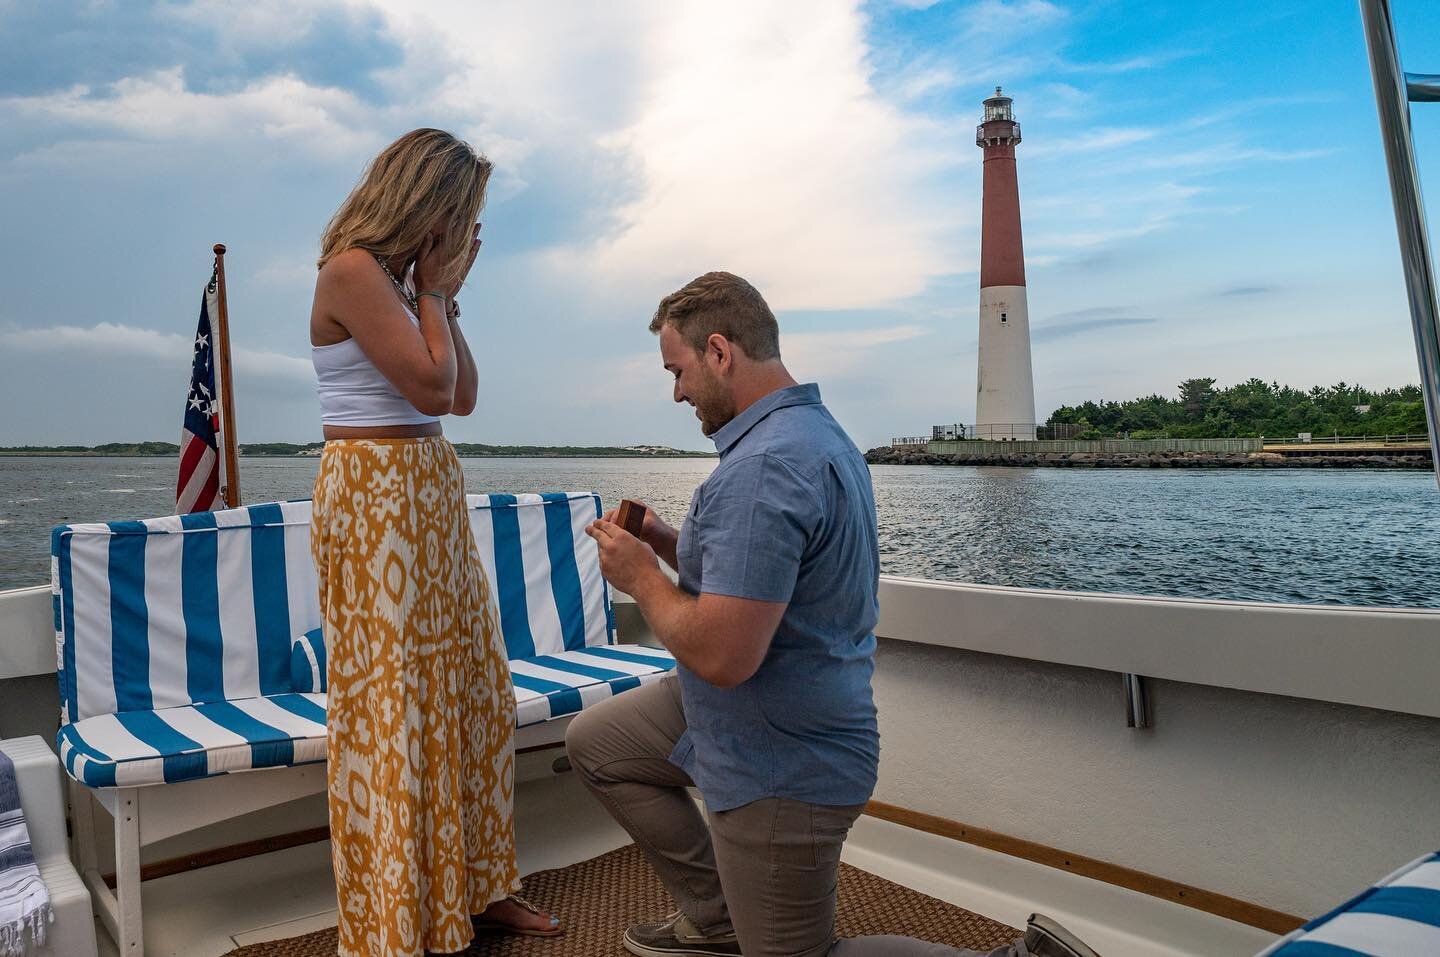 Wanted to throw a huge shout to Danny and Ali on their engagement last night. The weather held off perfectly, even though there was a crack of thunder right as he got down on one knee. The rest of the family was hiding in the Gazebo at the lighthouse